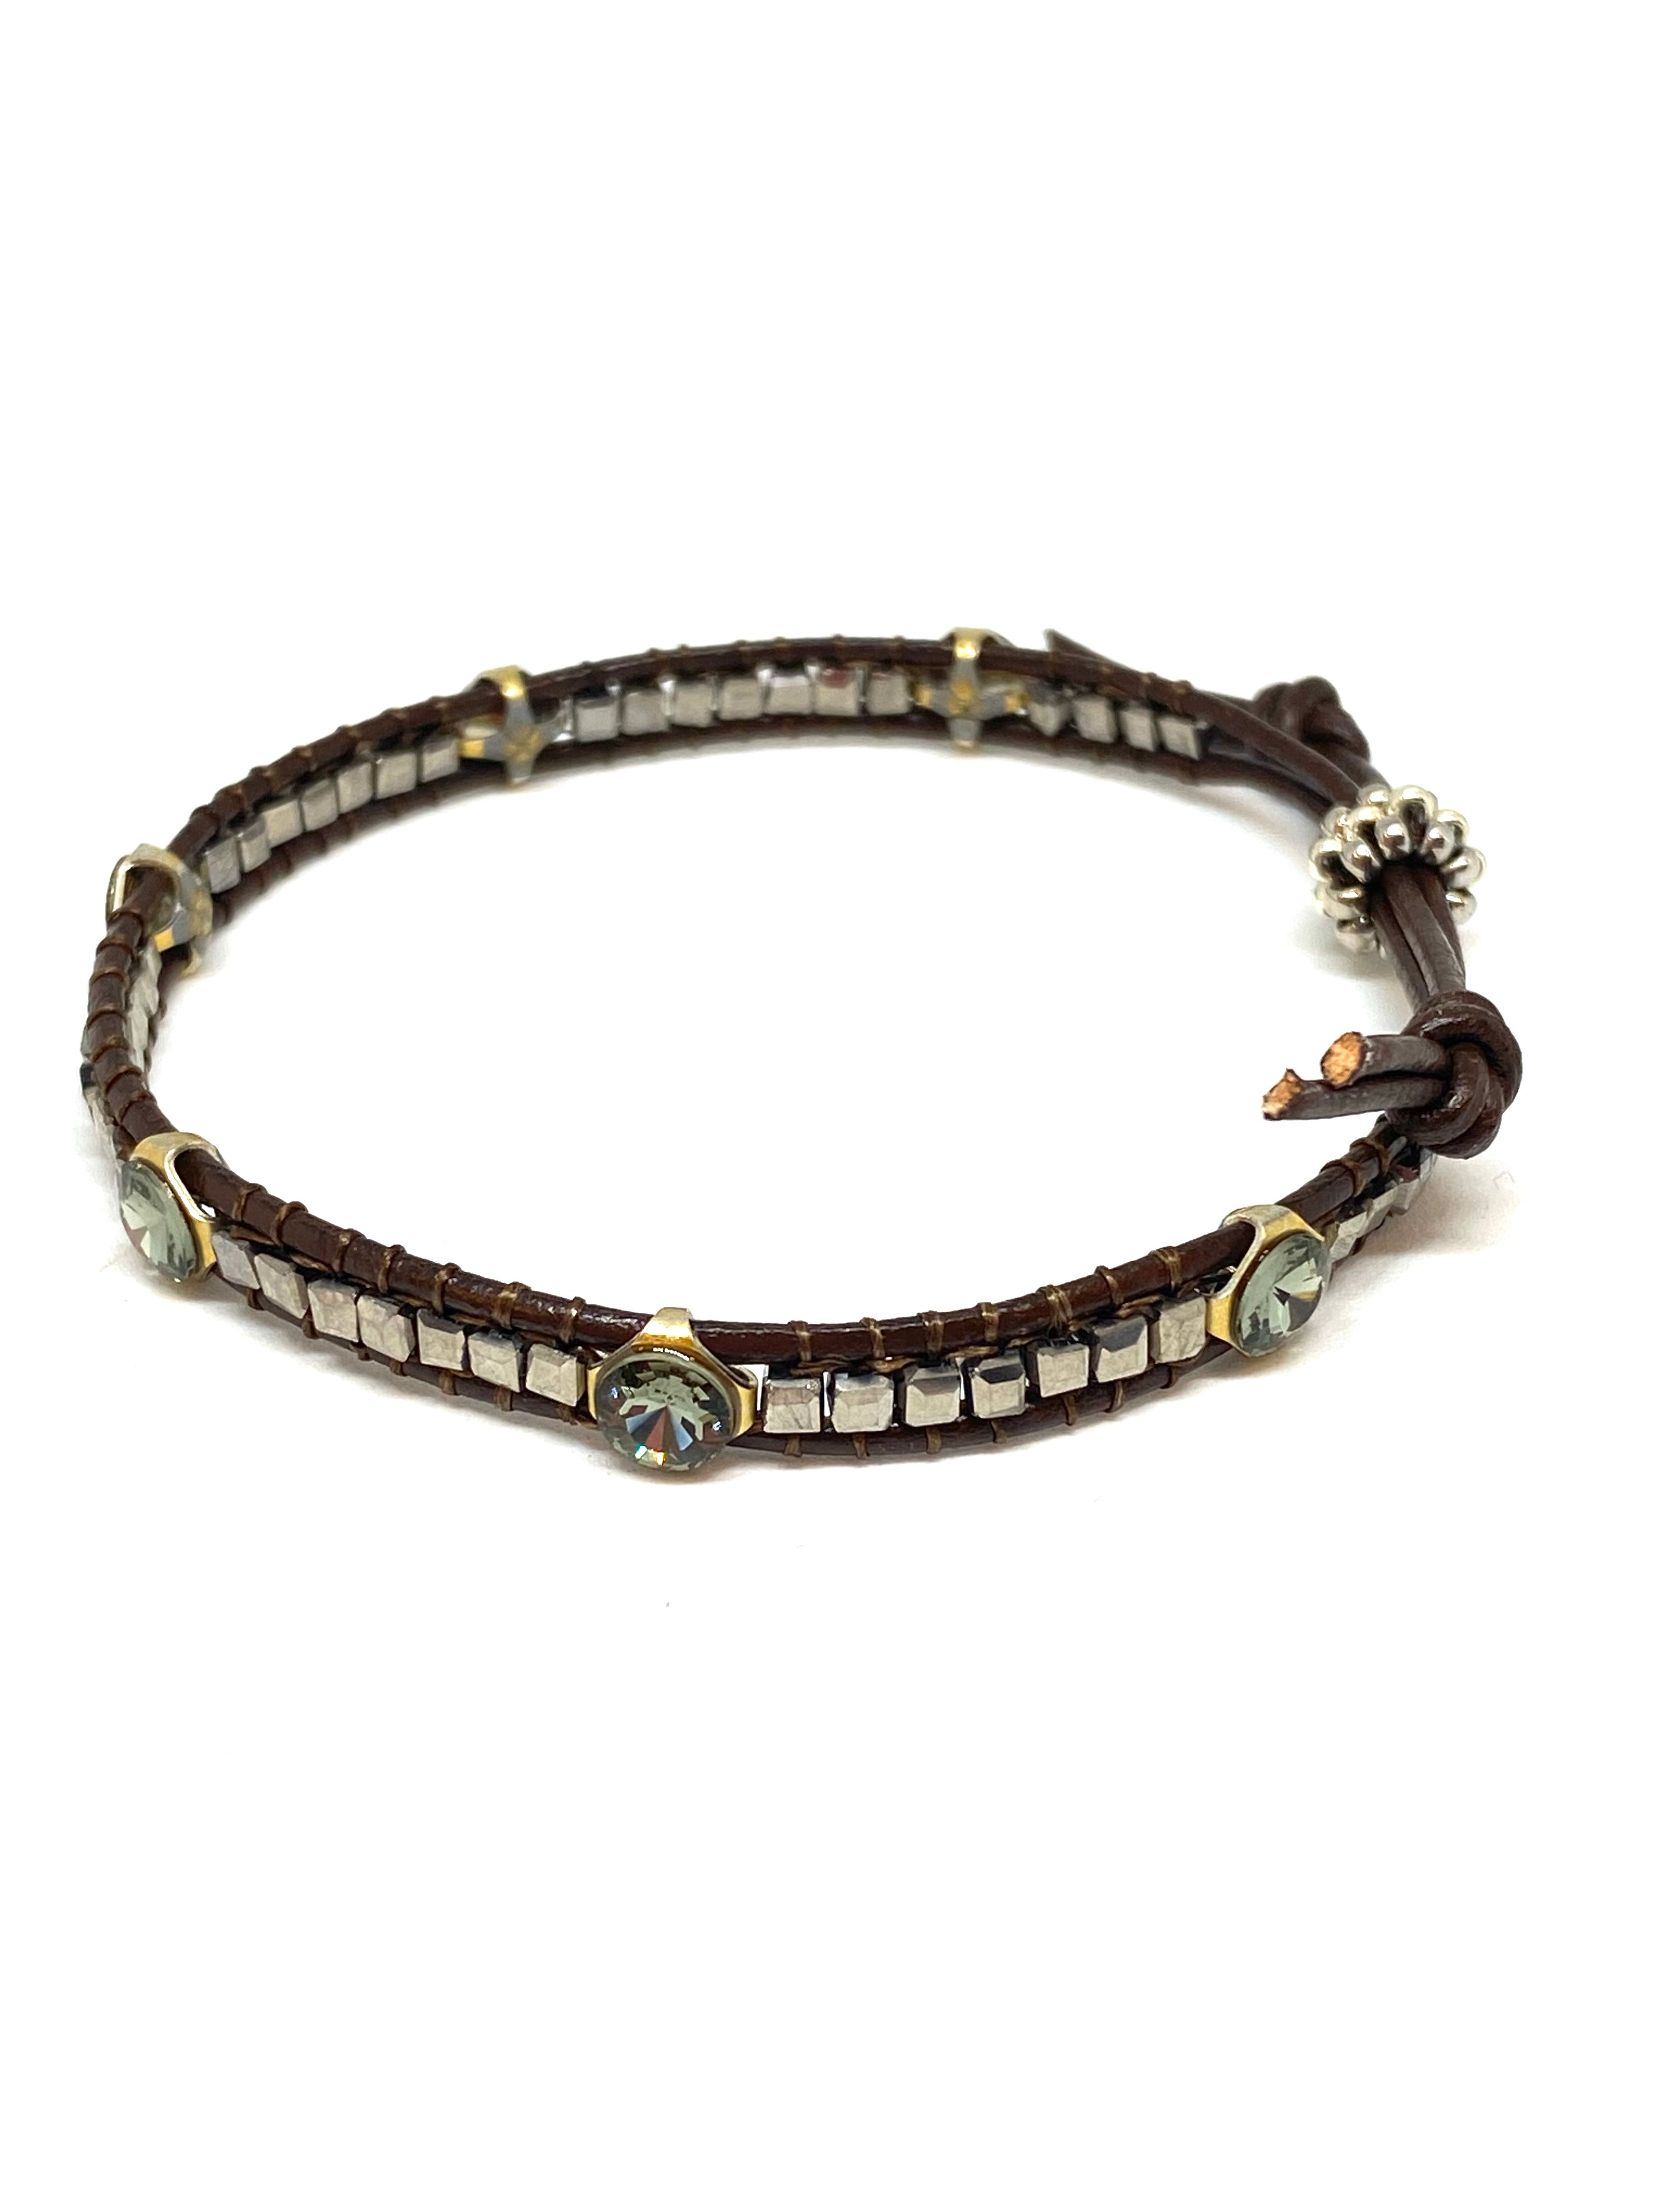 Miguel Ases Leather Bracelet with Swarovski, Pyrite and Miyuki Beads, found at Patricia in Southern Pines, NC 